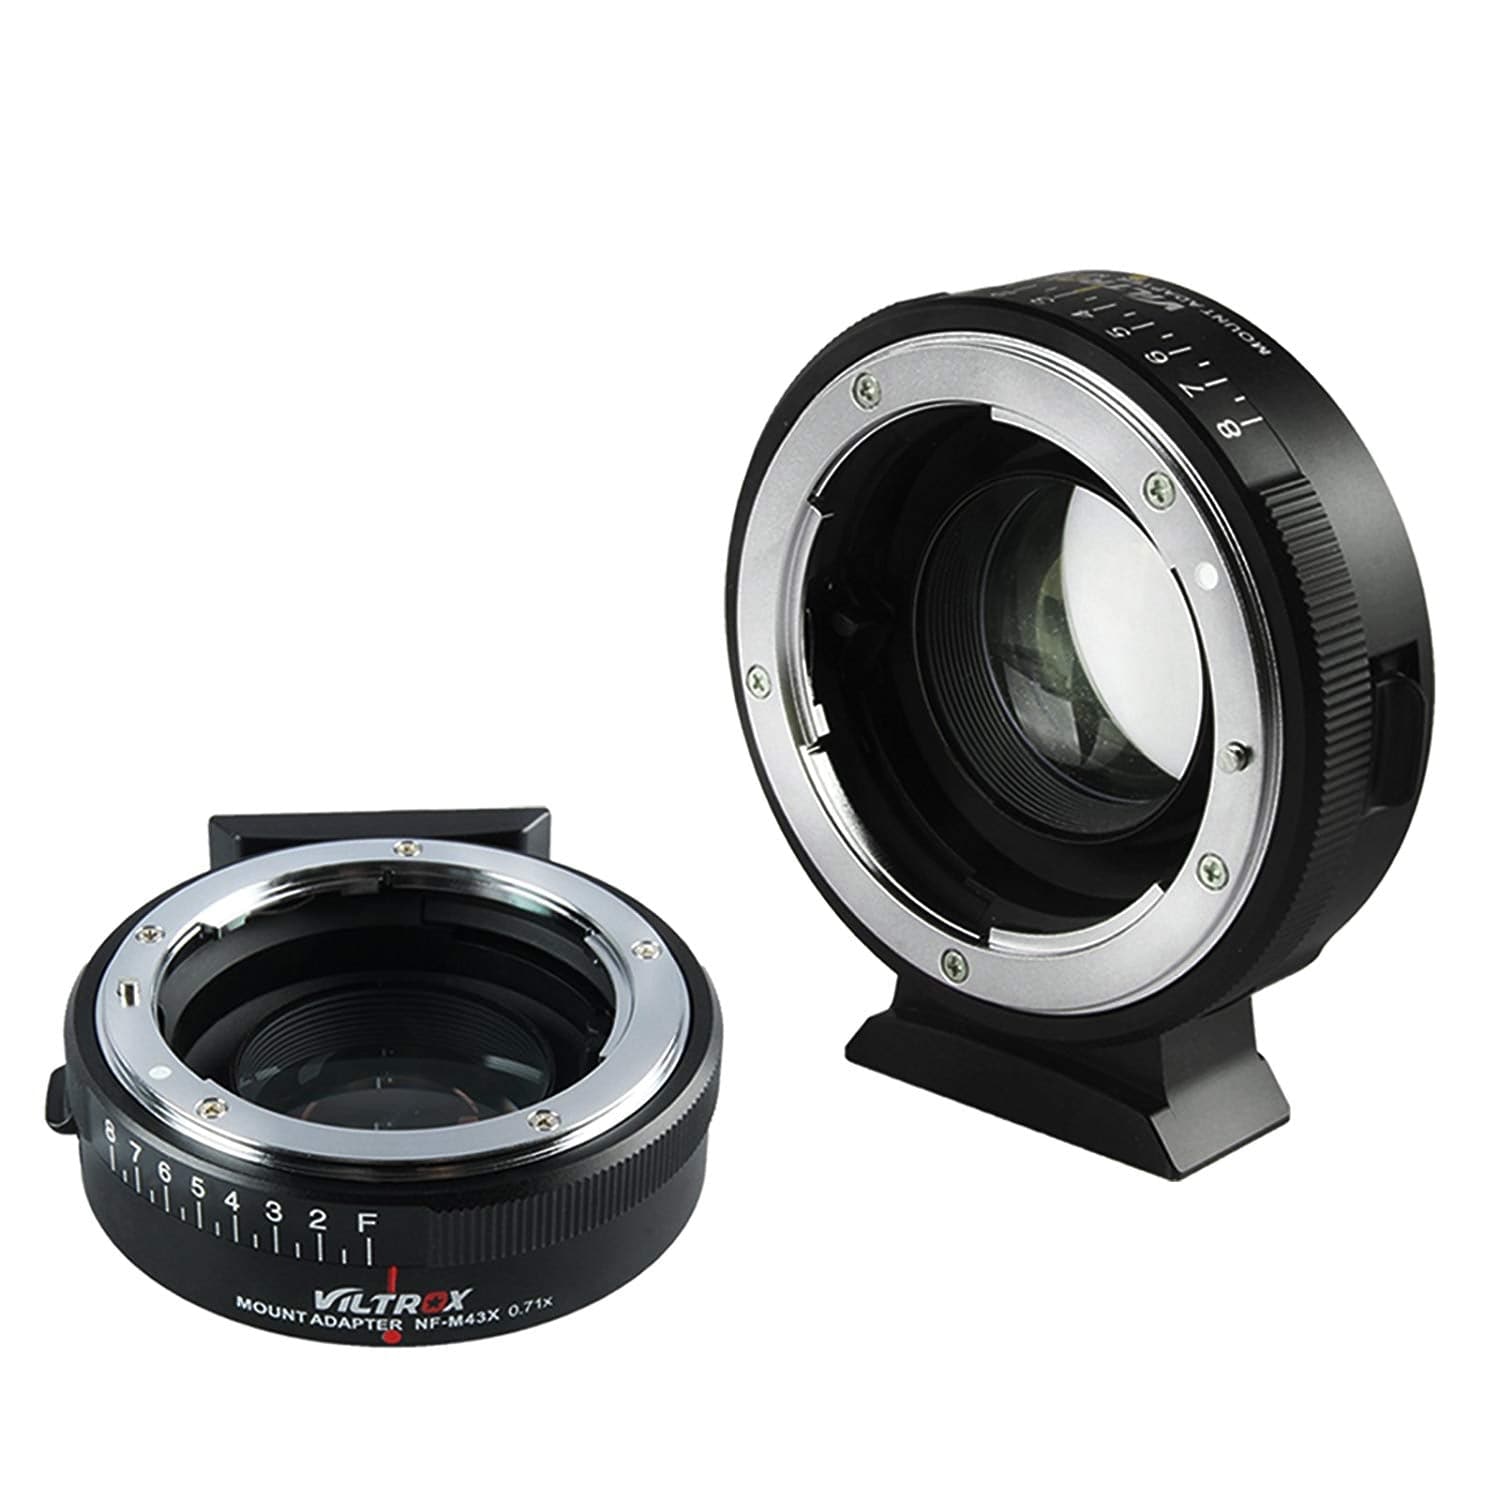 VILTROX NF-M43X 0.71x Nikon F Lens to Micro Four Thirds Camera Speedbooster Mount Adapter